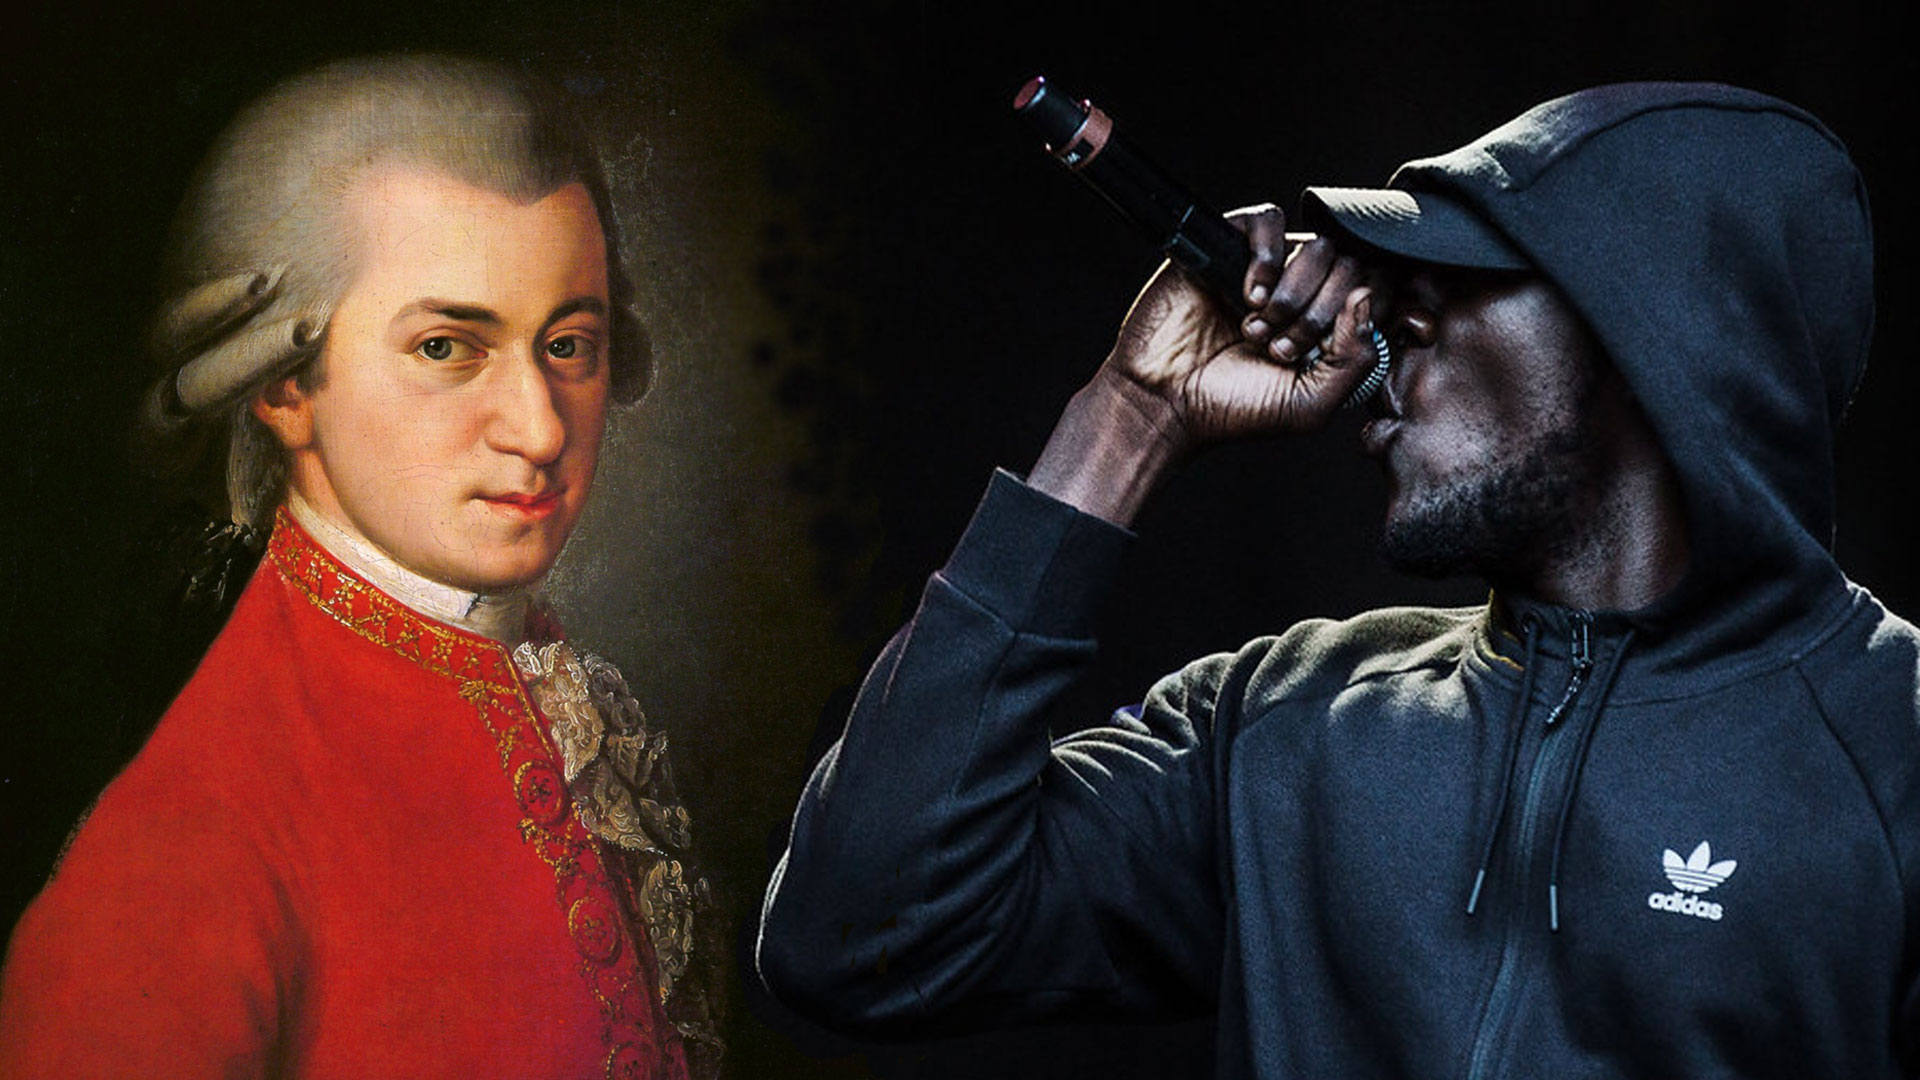 Mozart and Stormzy